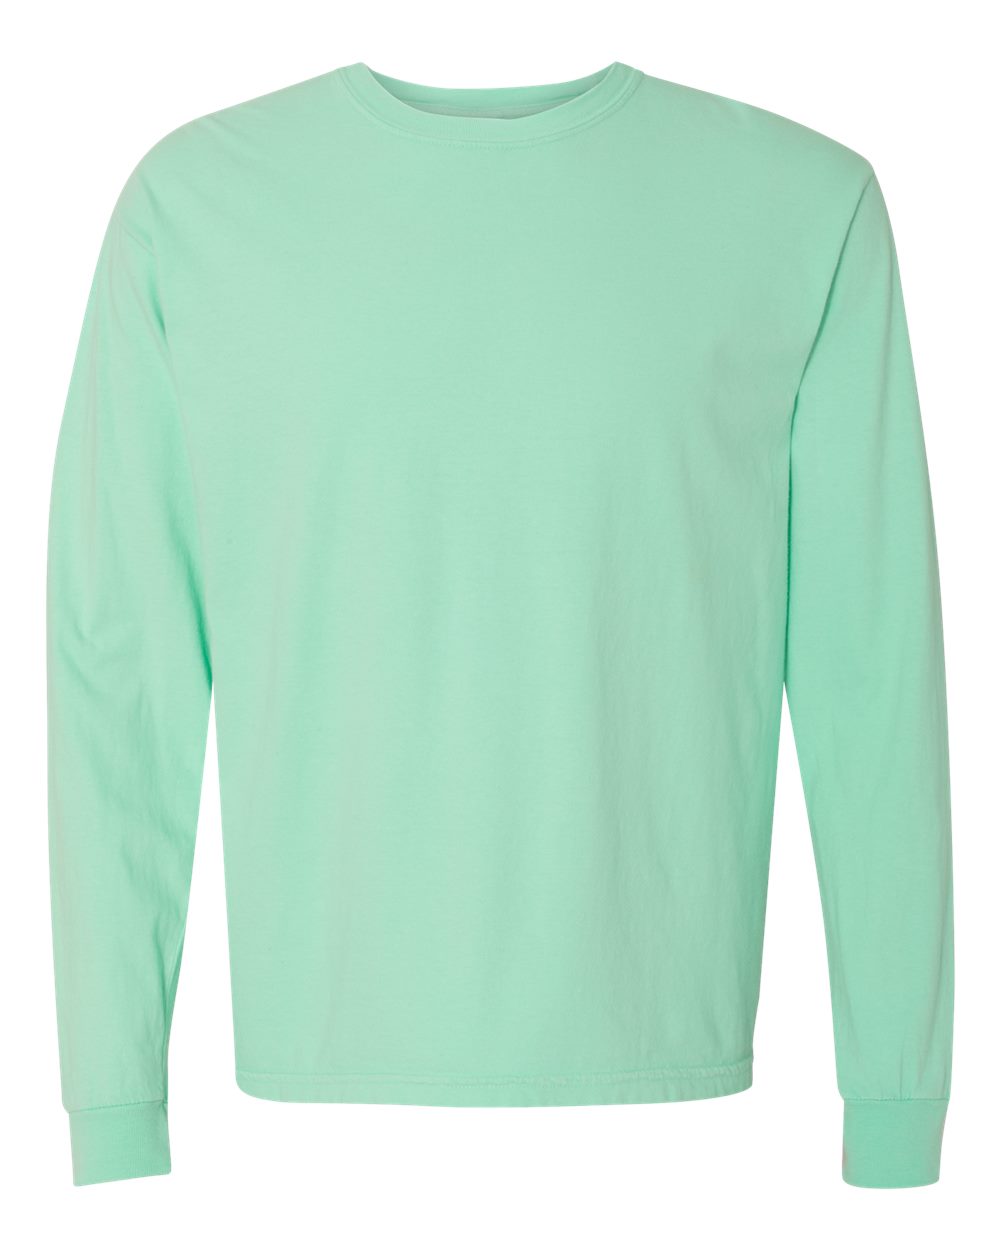 Long Sleeve T-Shirt, Full Sleeve Tee – 6.1 oz./yd² (US), 100% ring spun  cotton, Heavyweight Pigment-Dyed Long Sleeve Shirt, The Perfect  Combination of Durability and Fashion-Forward Design, RADYAN